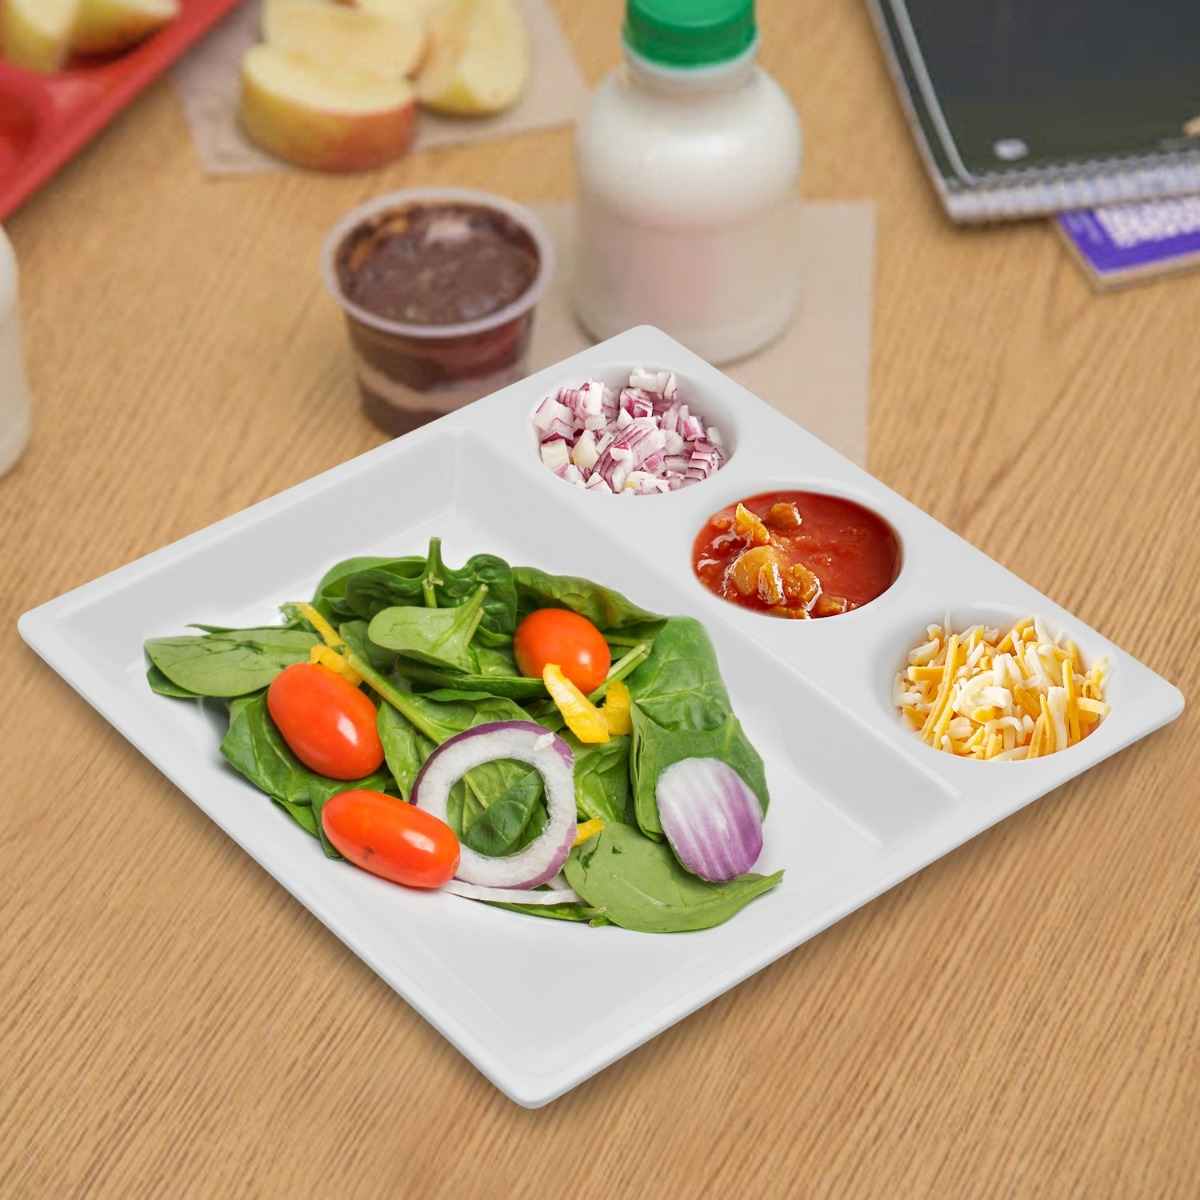 Dinewell Melamine 4 Partition Tray White